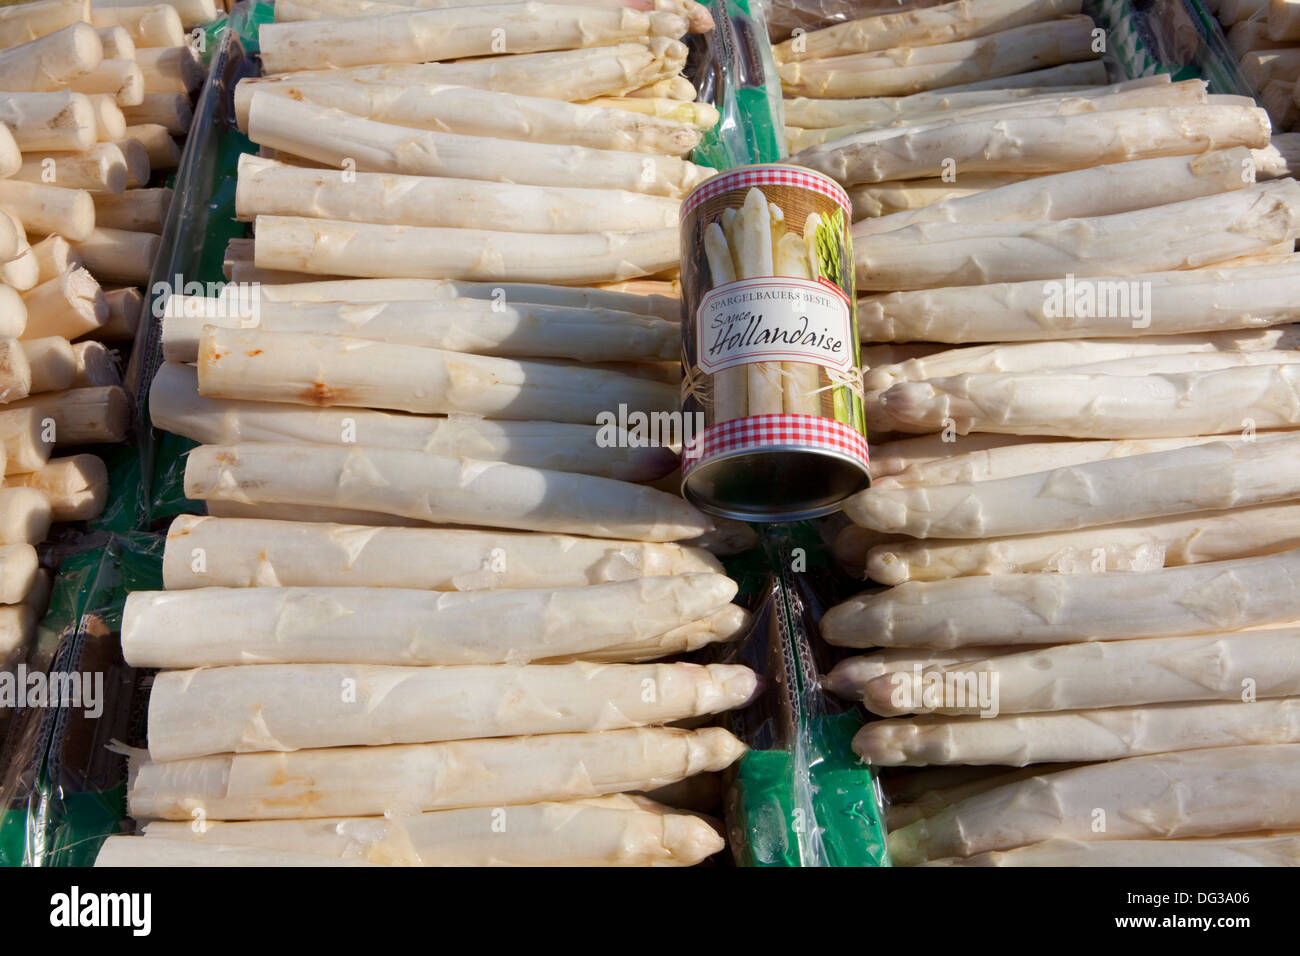 Asparagus from Nienburg at a market stall, Hanover, Lower Saxony, Germany, Stock Photo